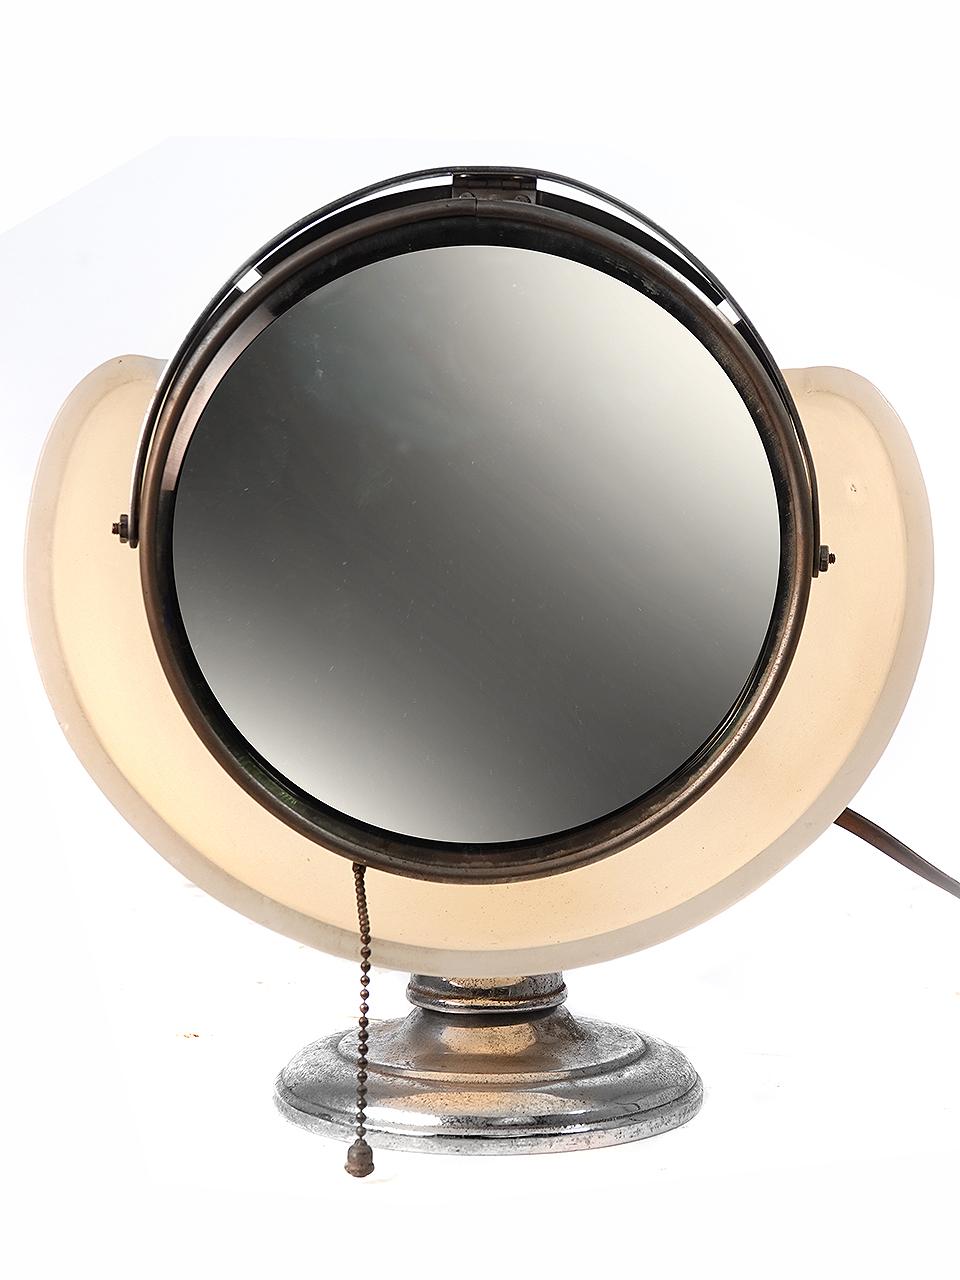 This is a rare Lapeer make up mirror lamp. They sometimes call this a cloud lamp. The round articulated mirror sits against a milk glass lamp reflector. It gives off a perfect shadow less and even light. It’s a perfect bathroom or bedroom accessory